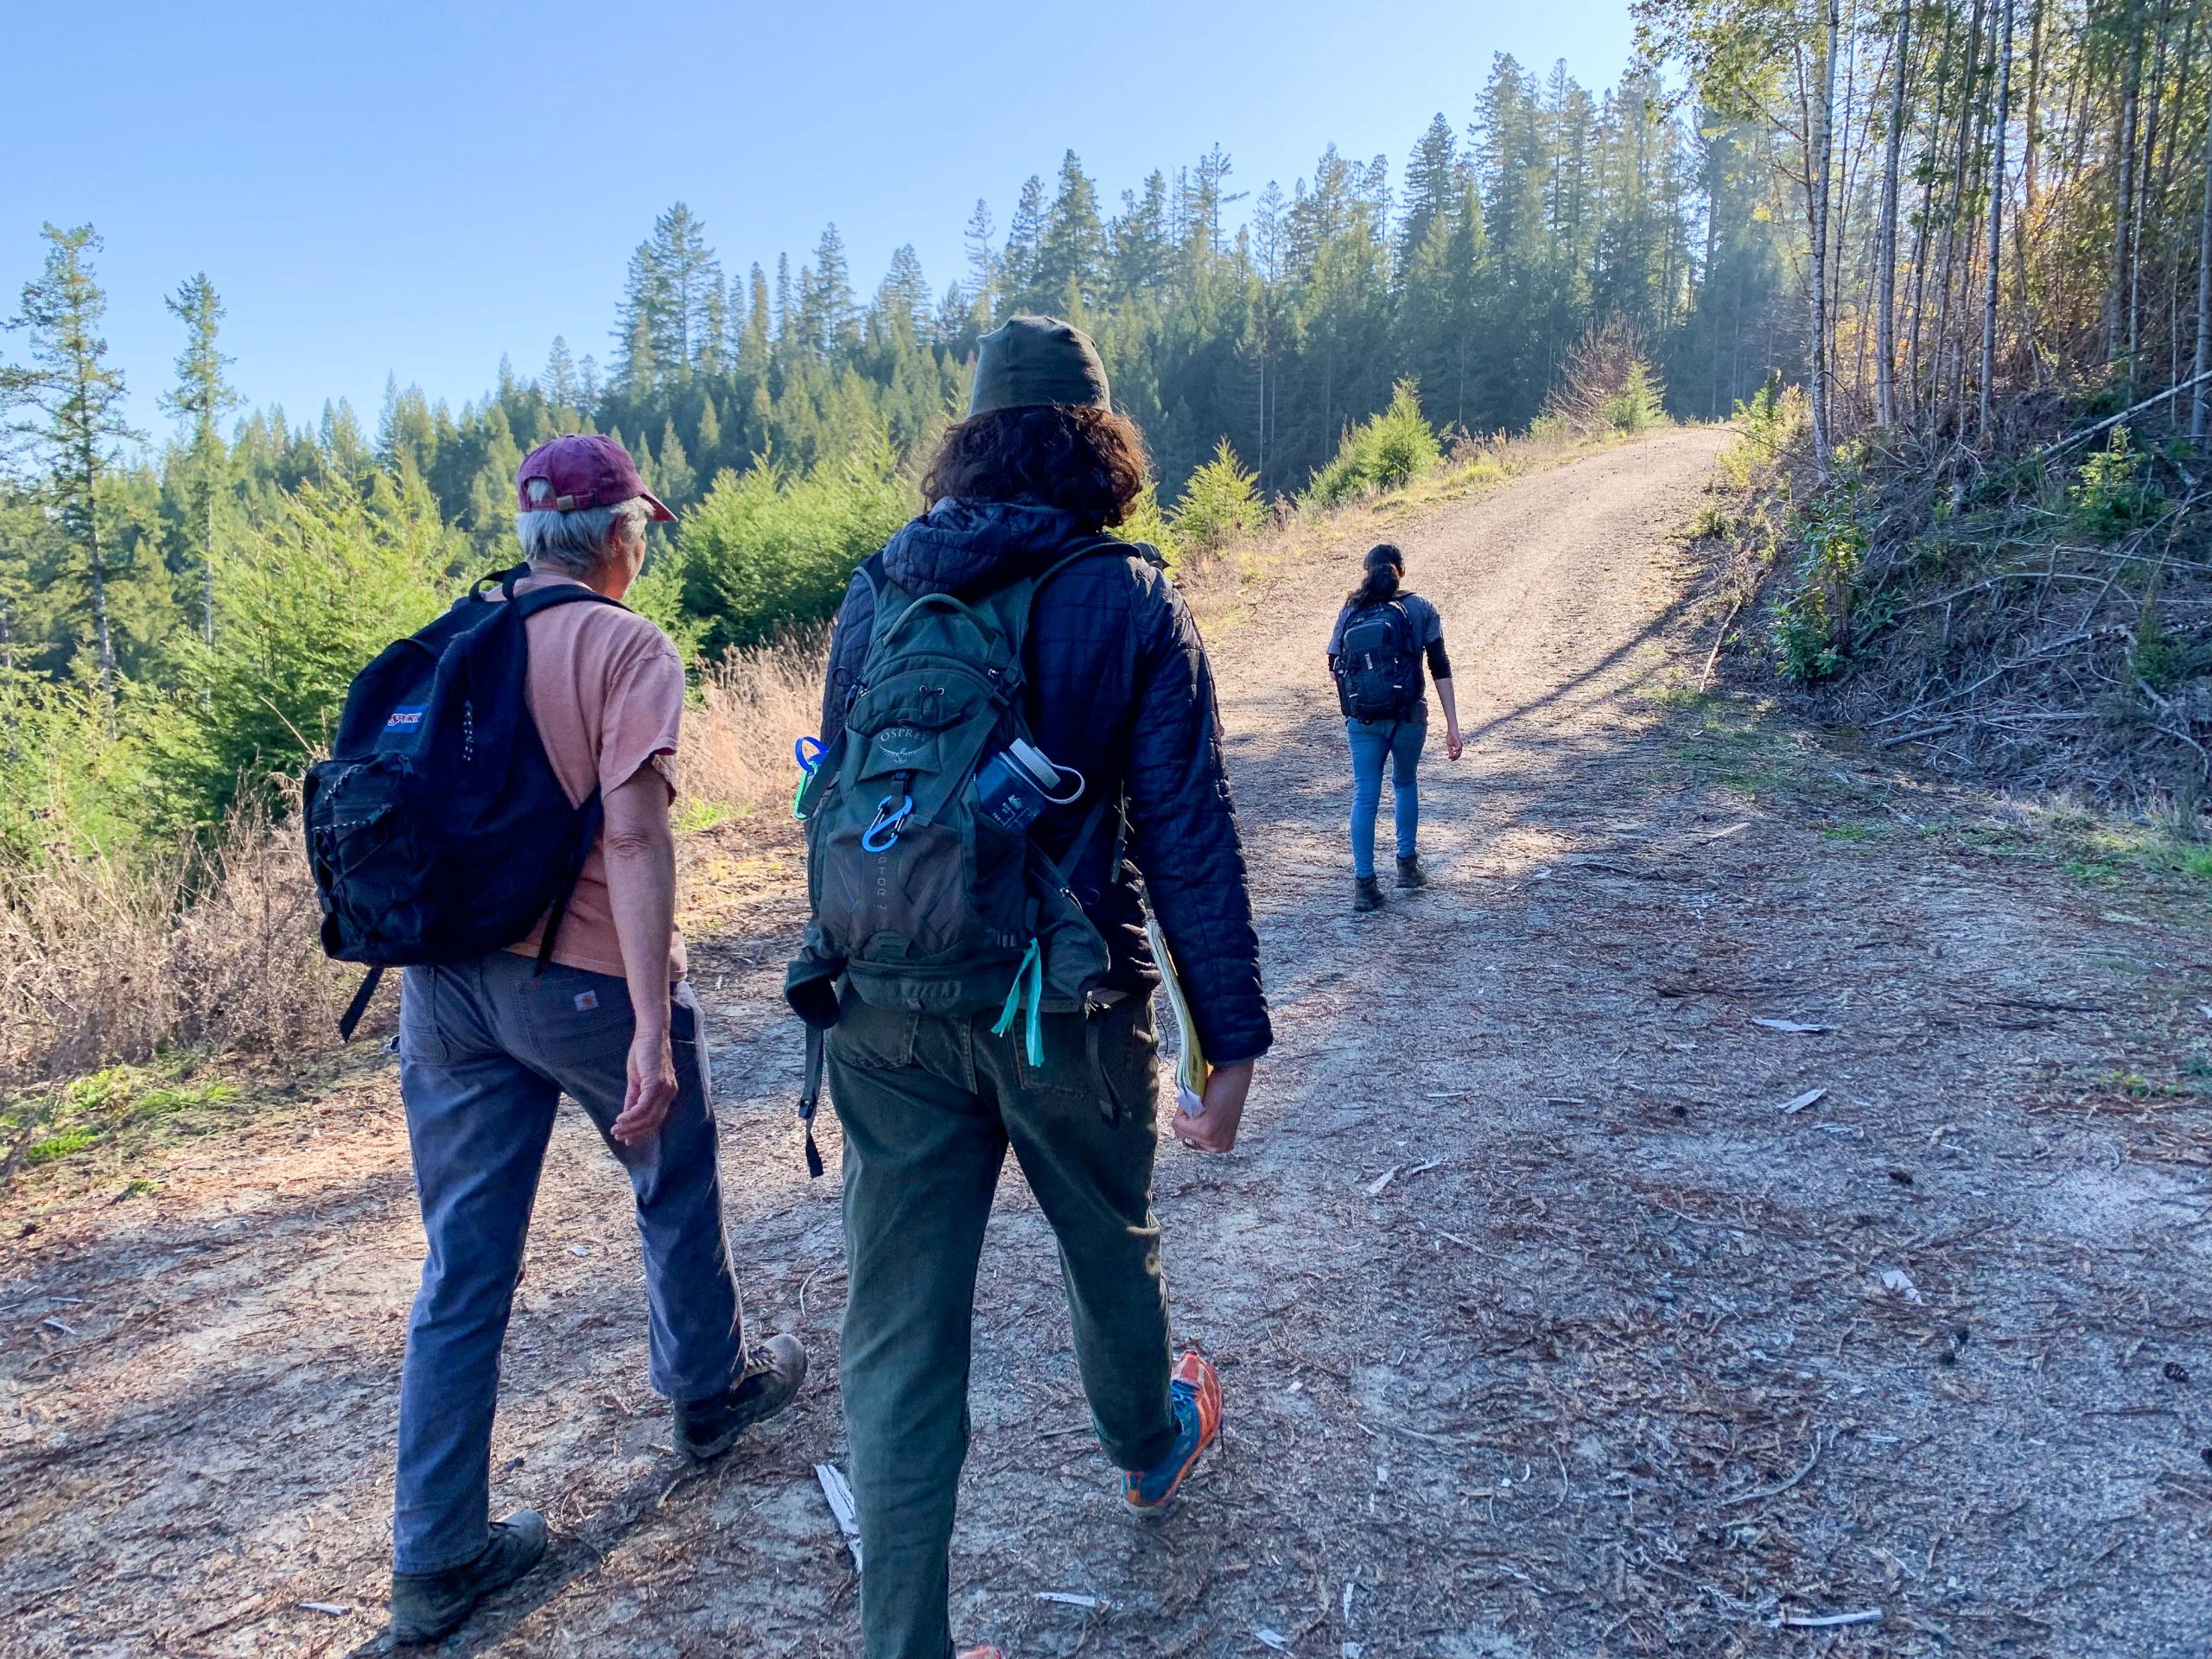 Four people walking and talking on a gravel road in a forest.